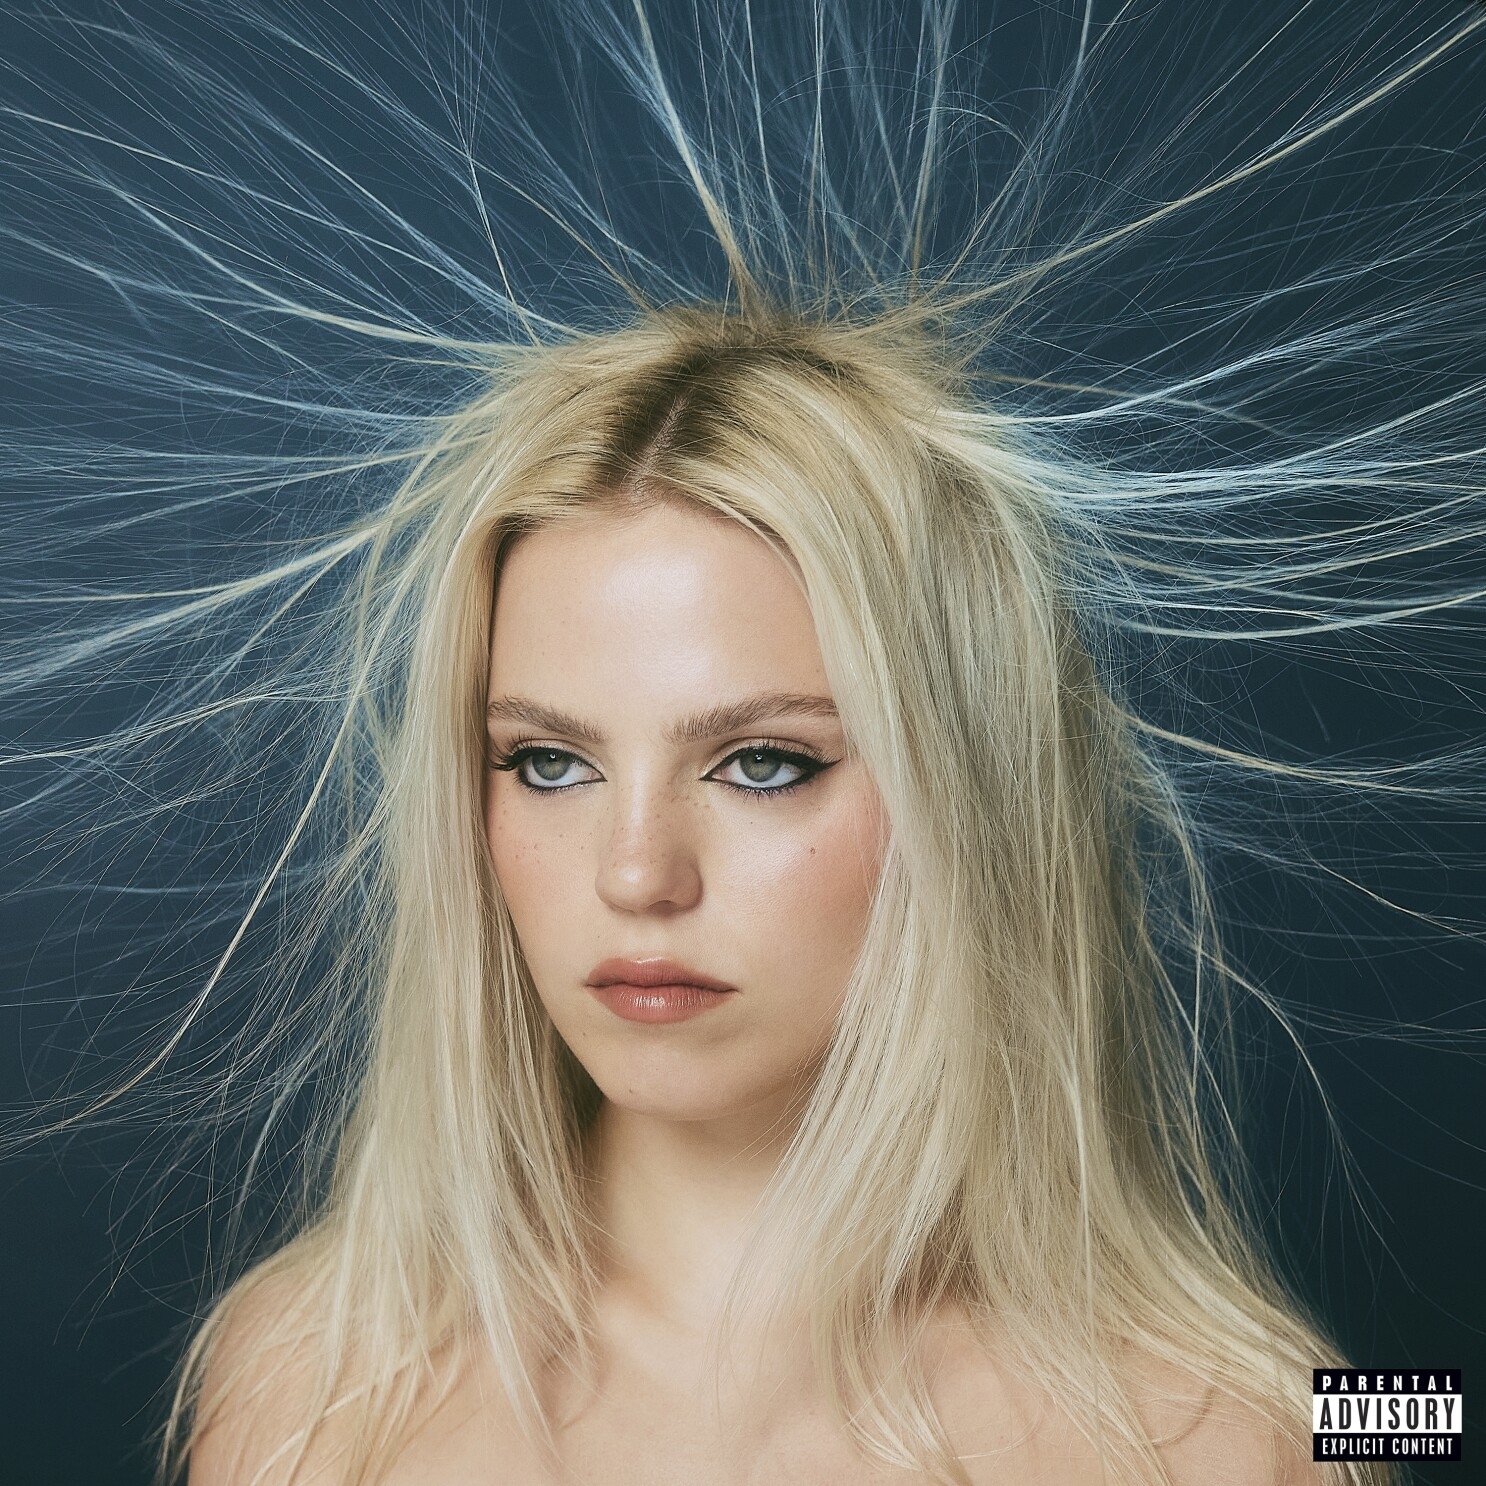 Album cover for &quot;Snow Angel&quot; by Reneé Rapp, showing her hair with electric static